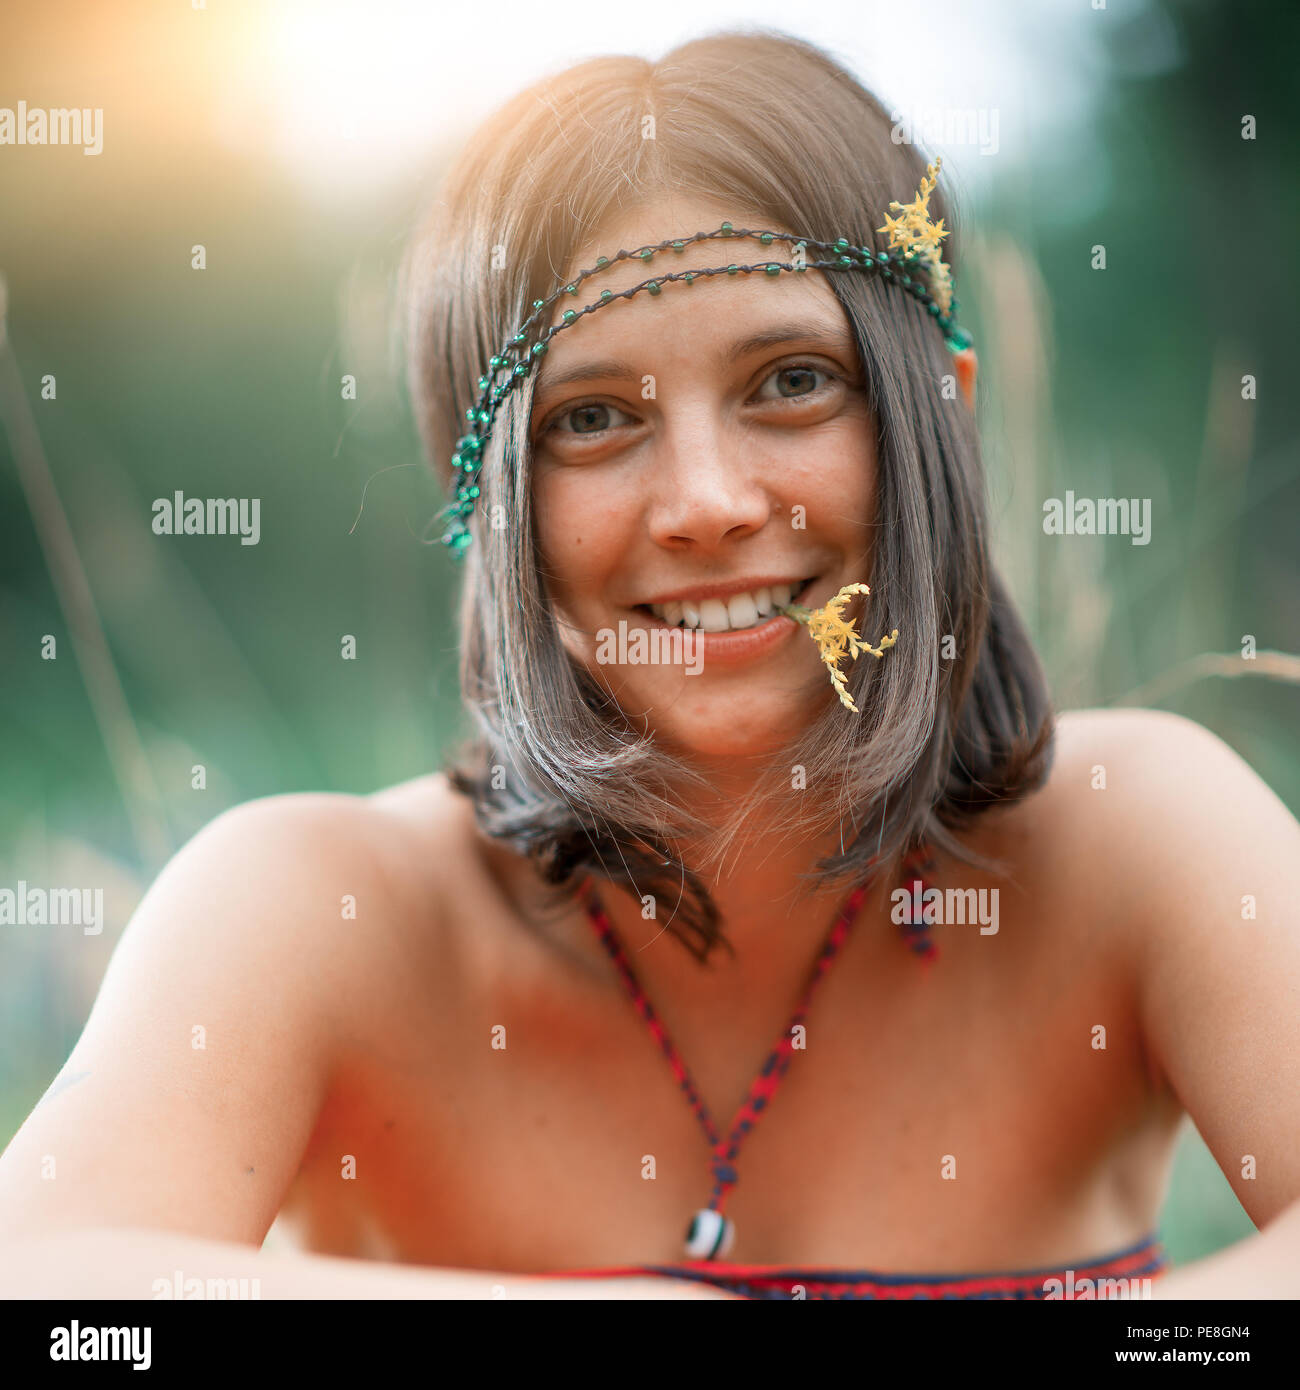 Portrait of a Woodstock Hippie style girl. With flower in the mouth. deliberately vintage photograph Stock Photo